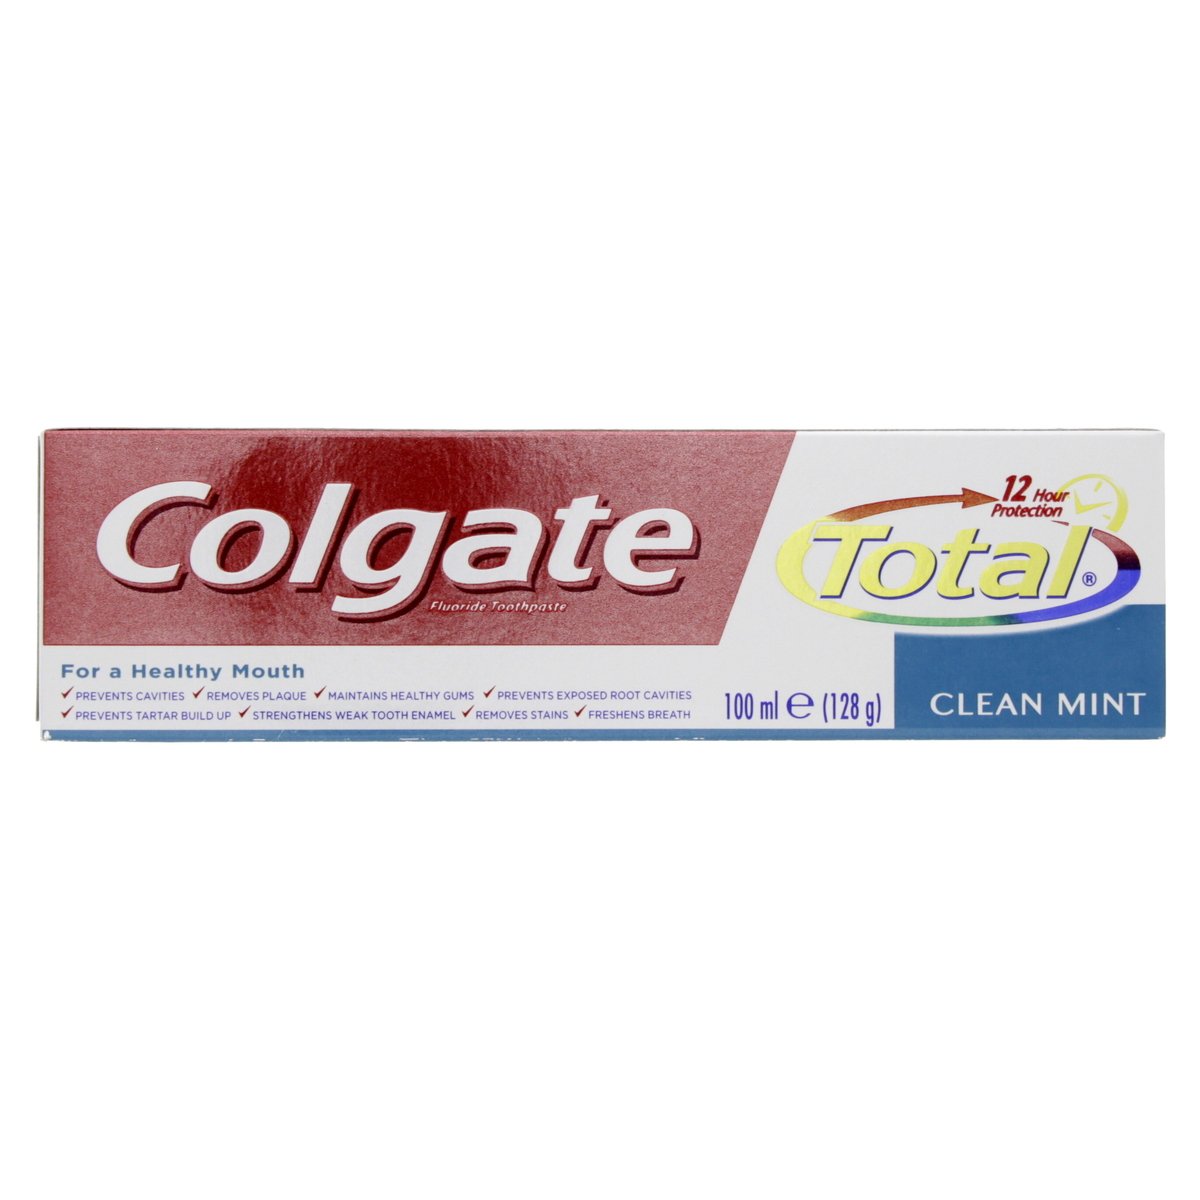 Colgate Fluoride Toothpaste Total Clean Mint 100ml